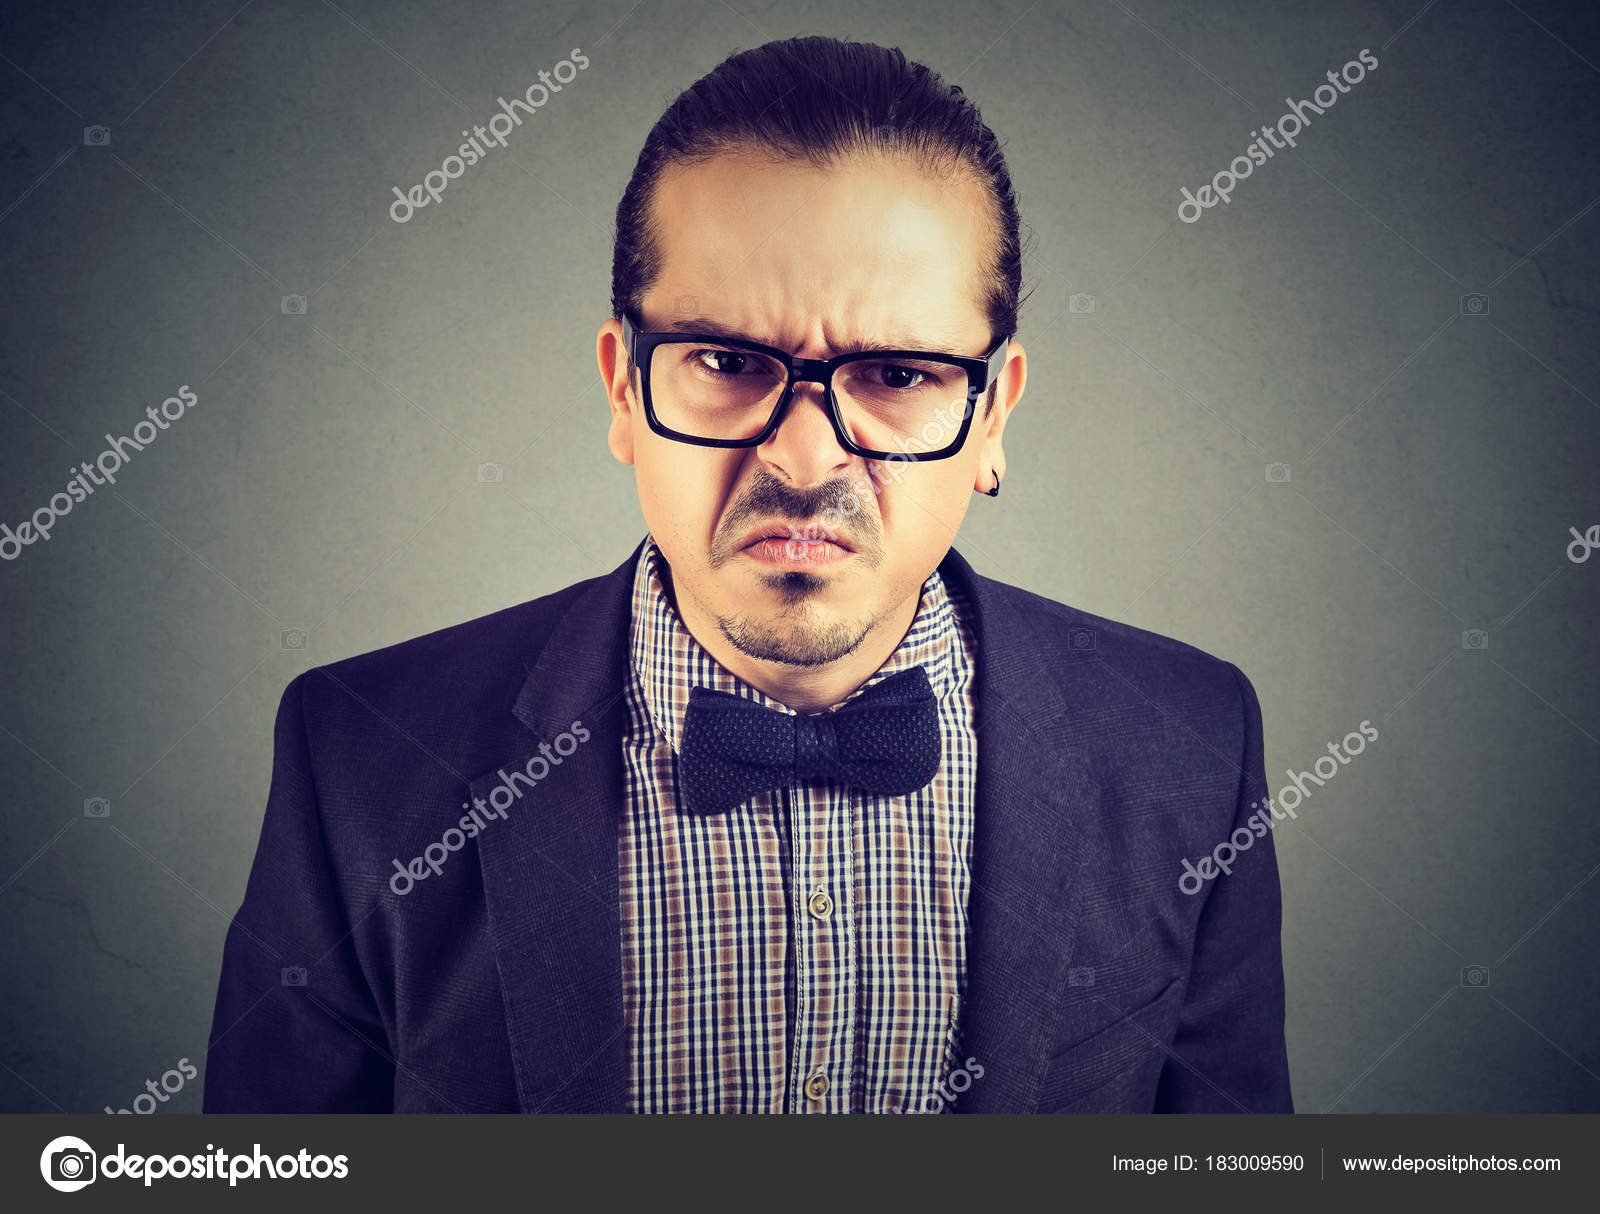 Gloomy man posing expressively — Stock Photo © SIphotography #183009590